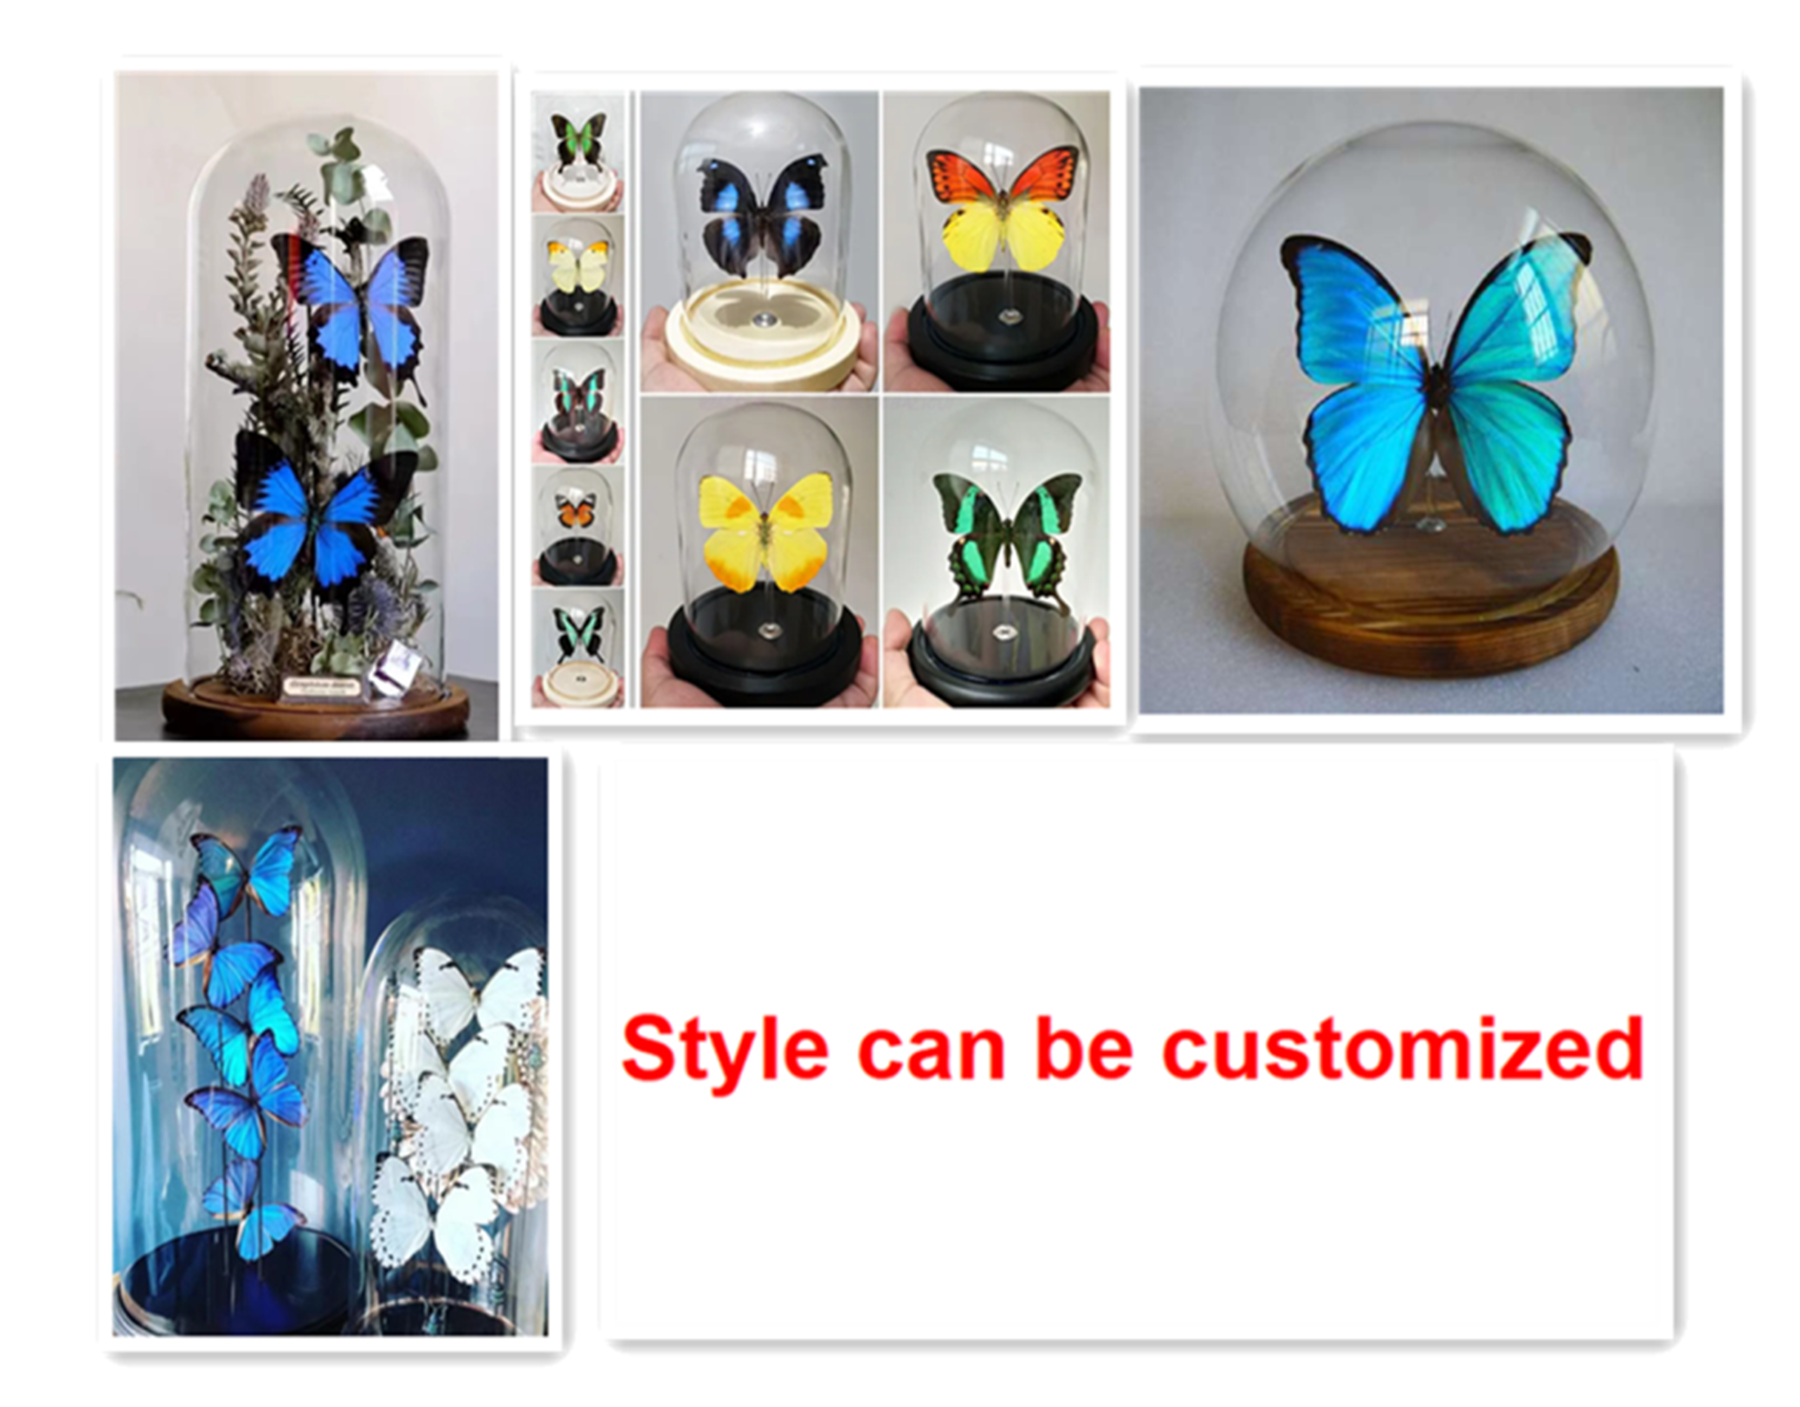 Graphium Eurypylus Butterfly Suppliers & Wholesalers - CF Butterfly